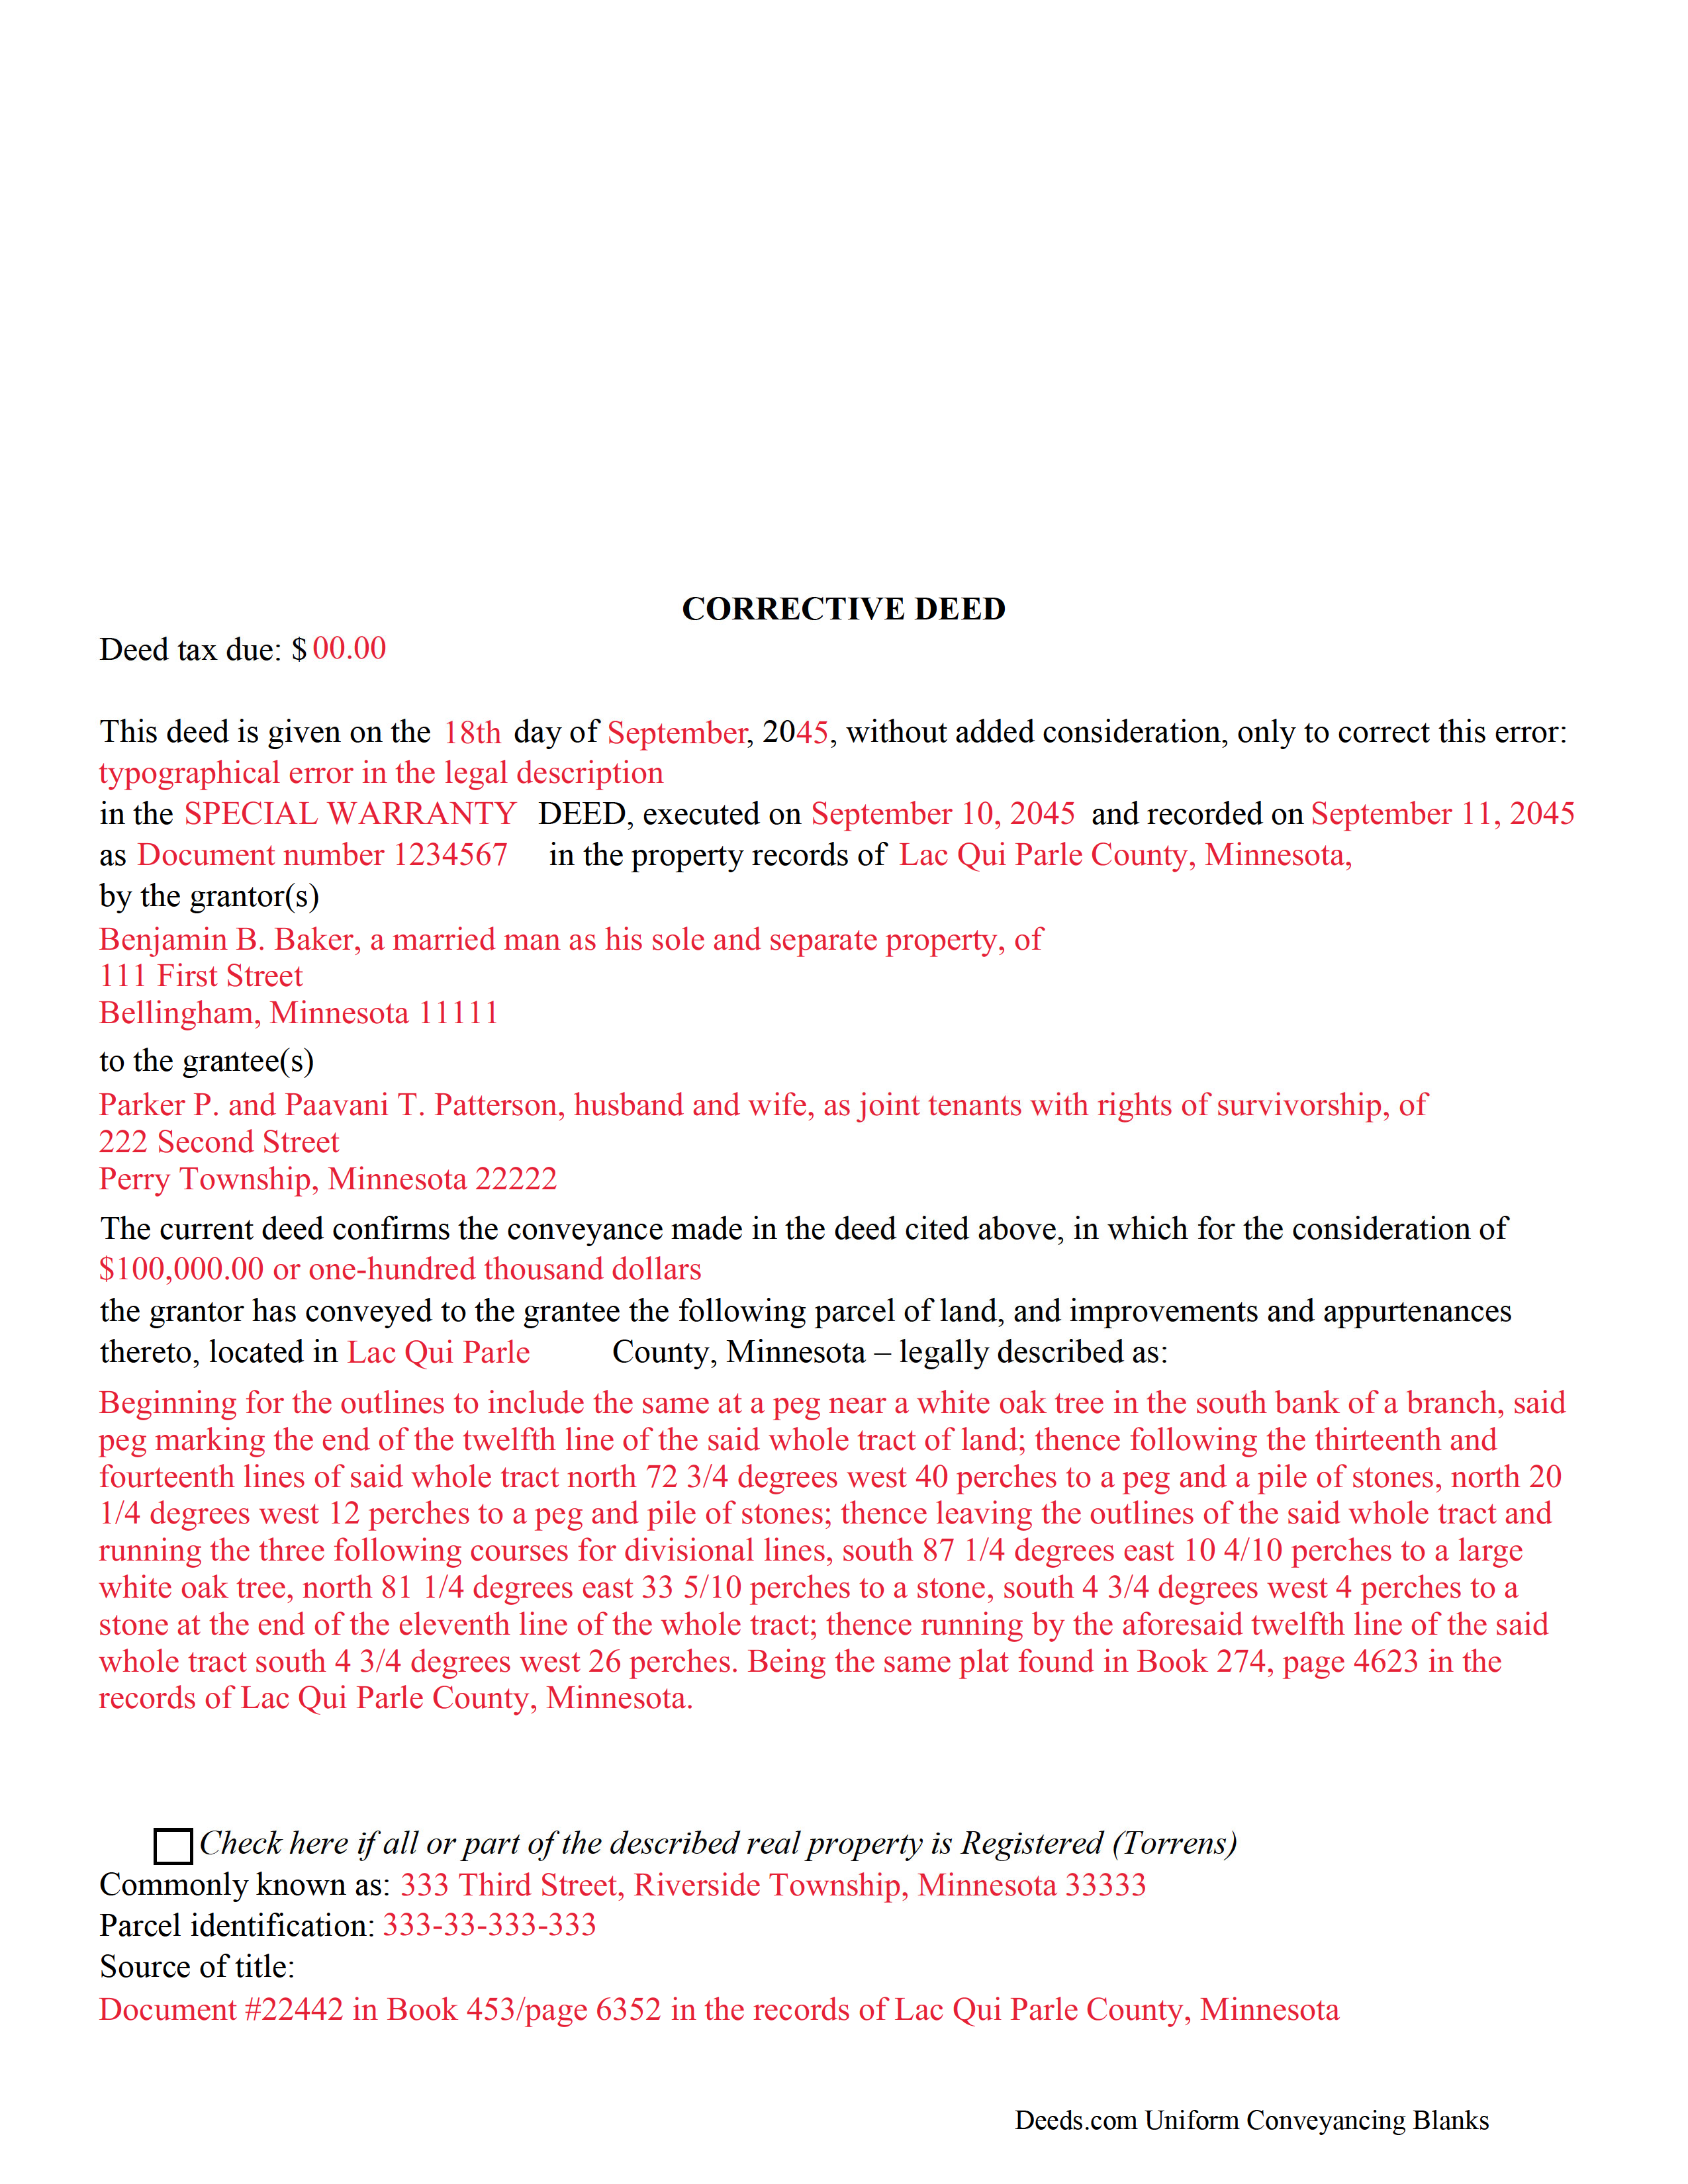 Completed Example of the Corrective Deed Document